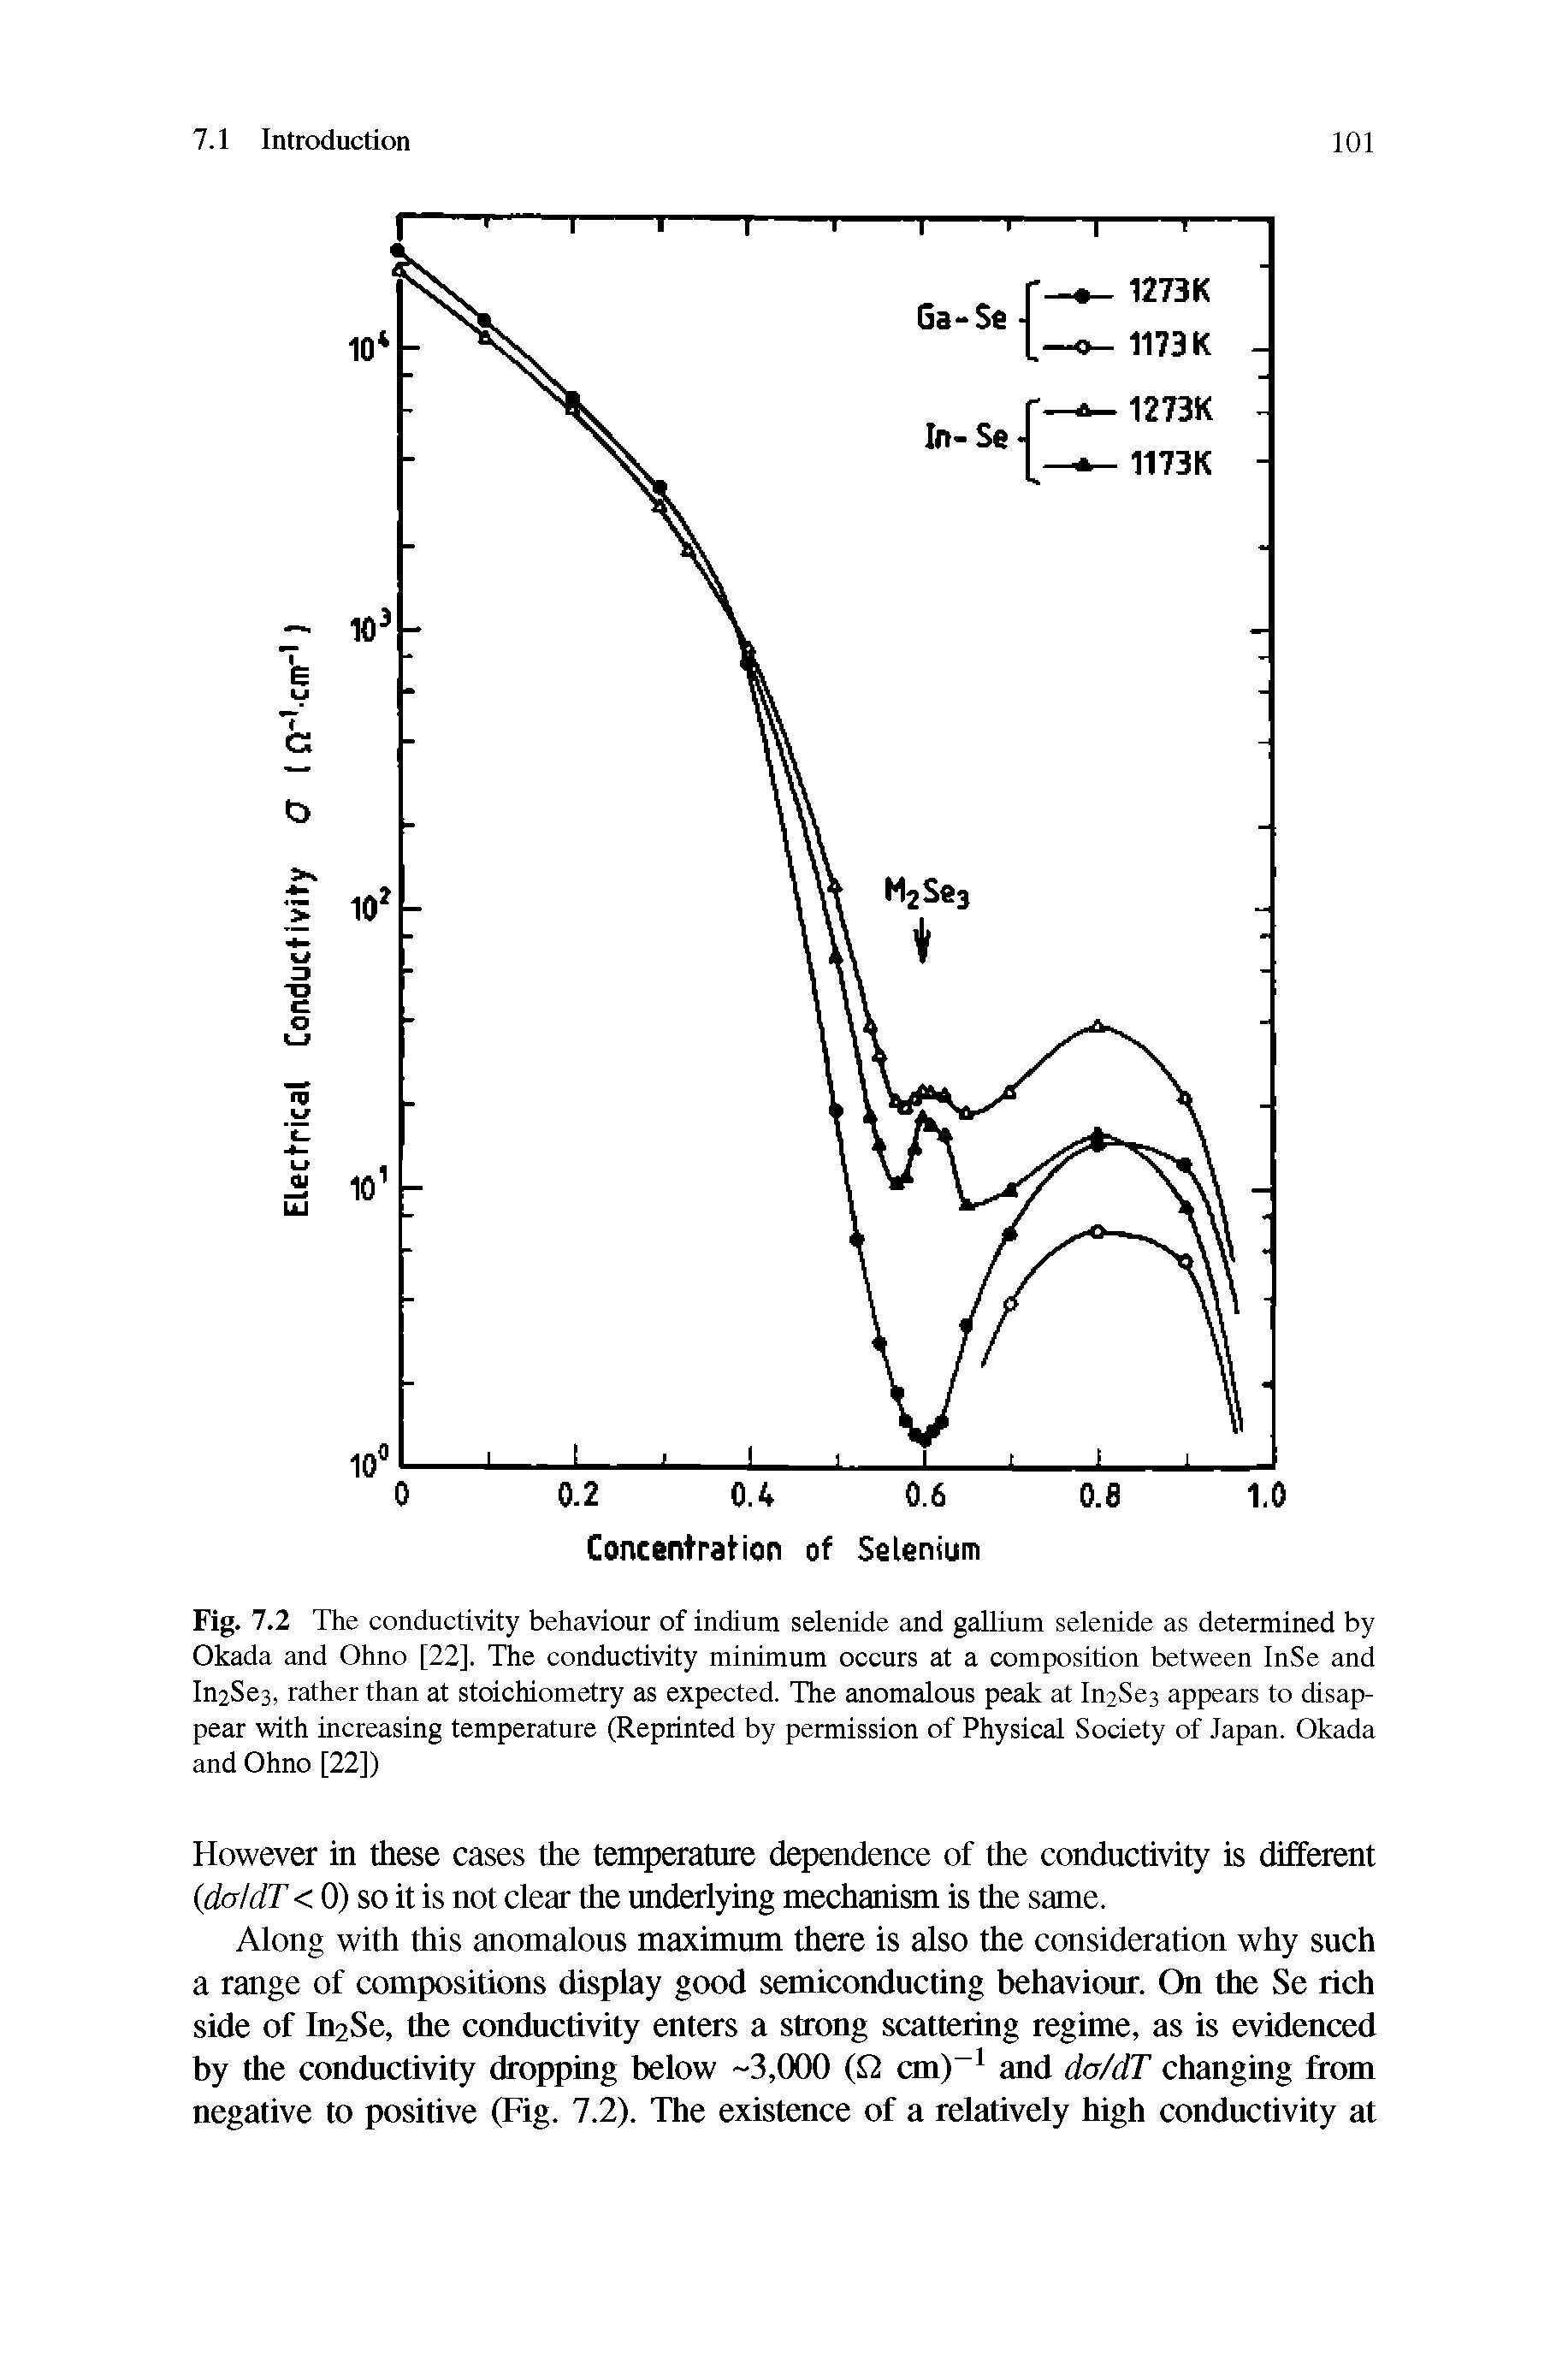 Fig. 7.2 The conductivity behaviour of indium selenide and gallium selenide as determined by Okada and Ohno [22], The conductivity minimum occurs at a composition between InSe and ln2Se3, rather than at stoichiometry as expected. The anomalous peak at IniSes appears to disappear with increasing temperature (Reprinted by permission of Physical Society of Japan. Okada and Ohno [22])...